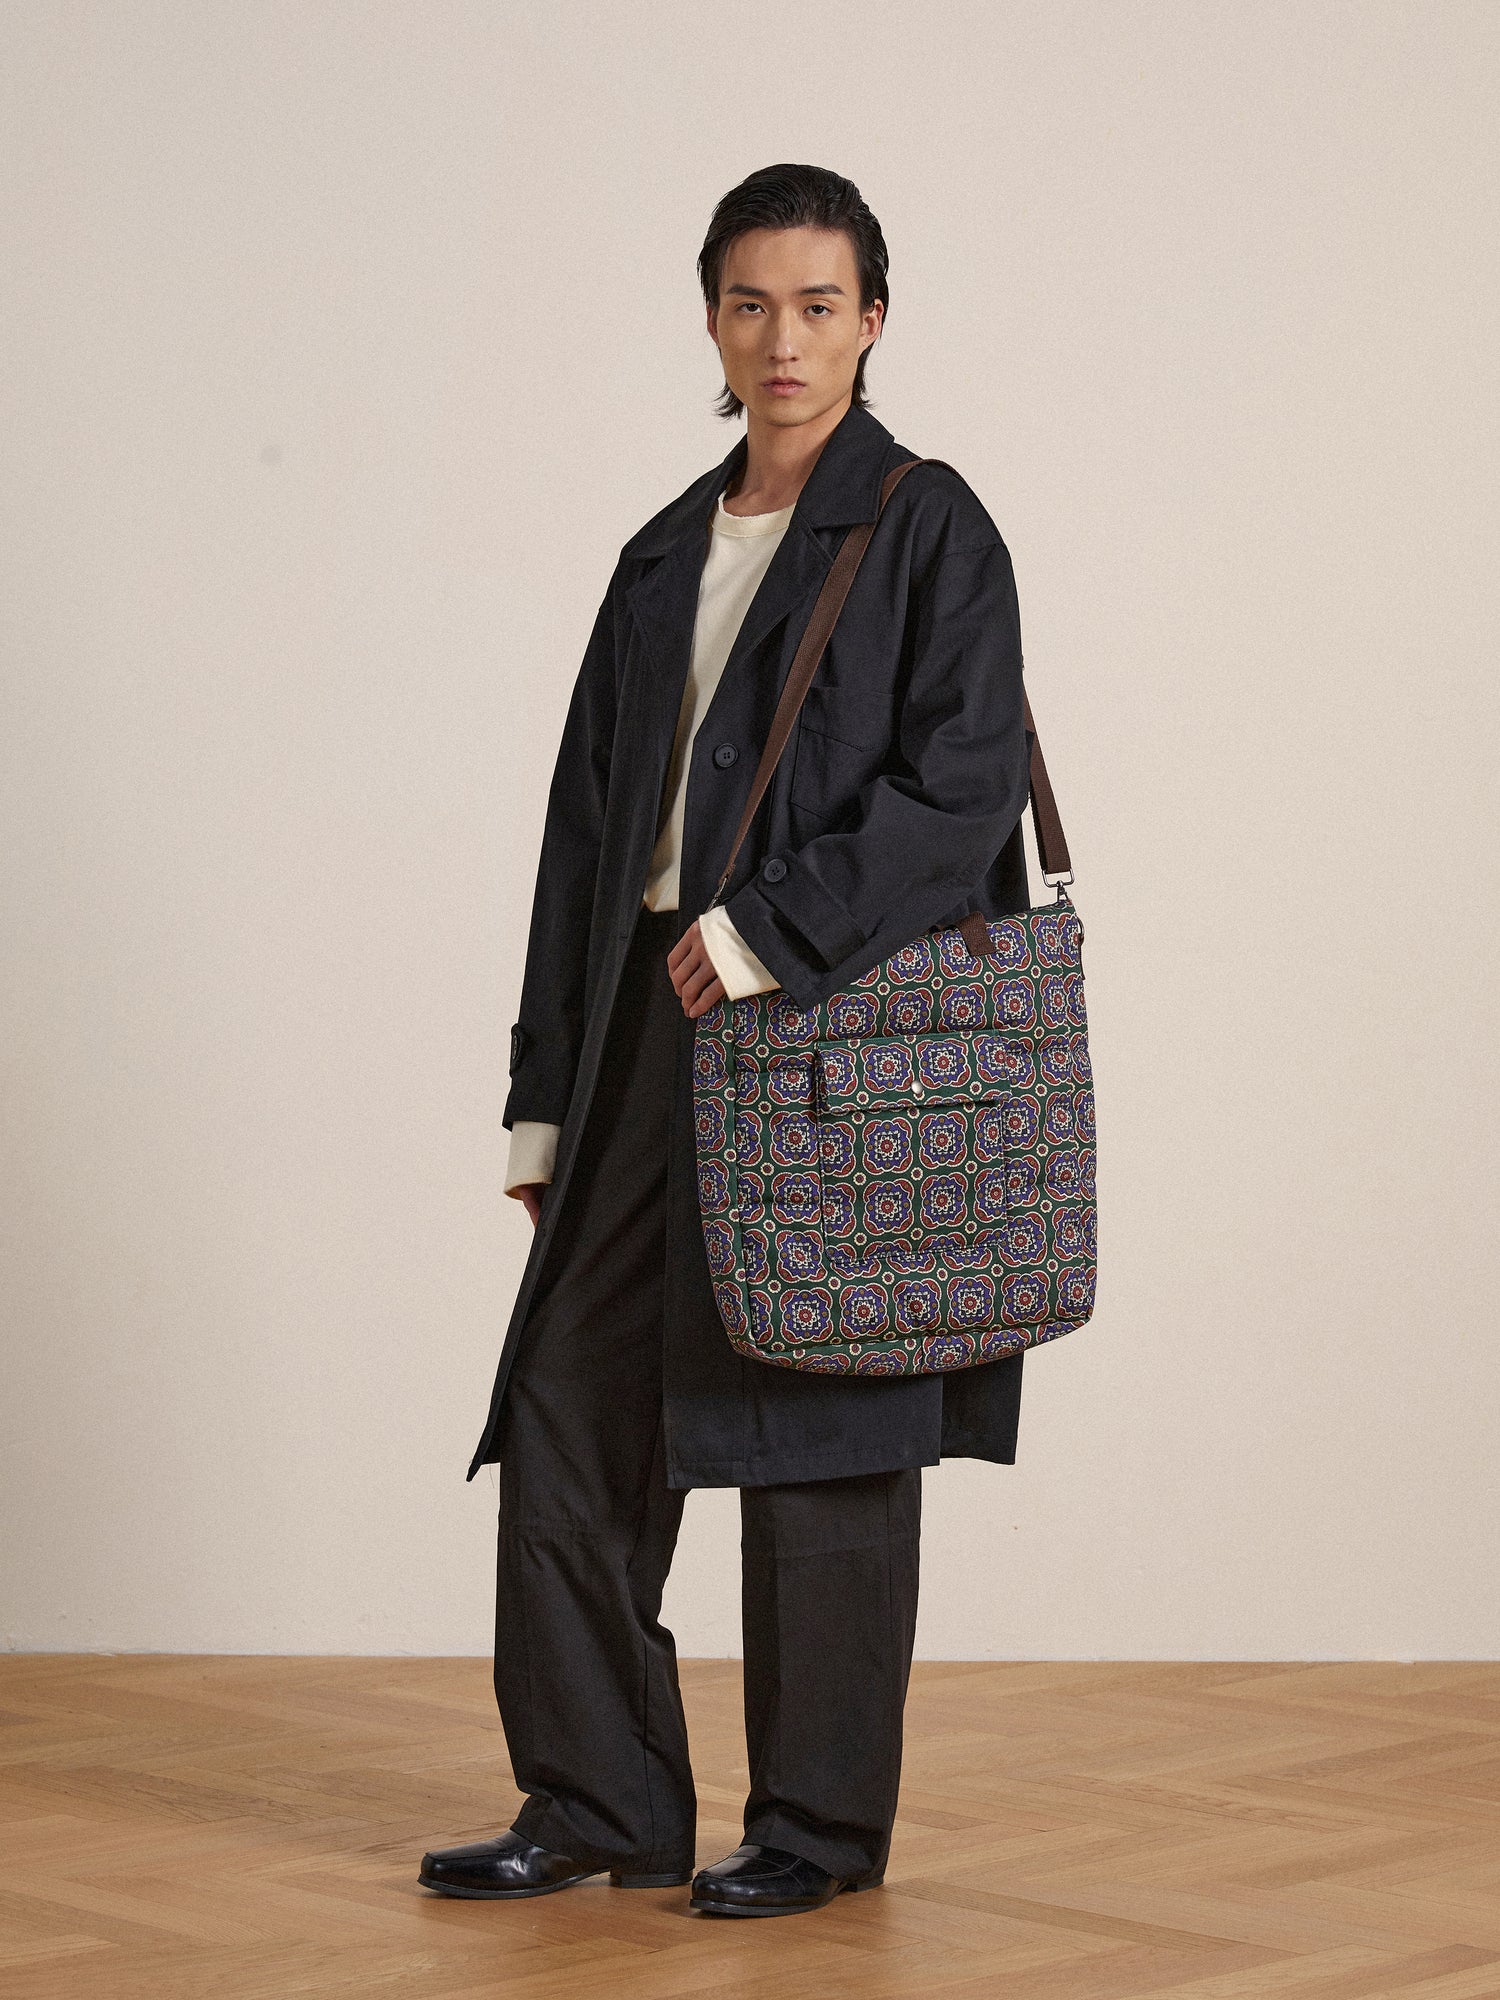 A woman wearing a trench coat and a Profound Pine Mosaic bag.